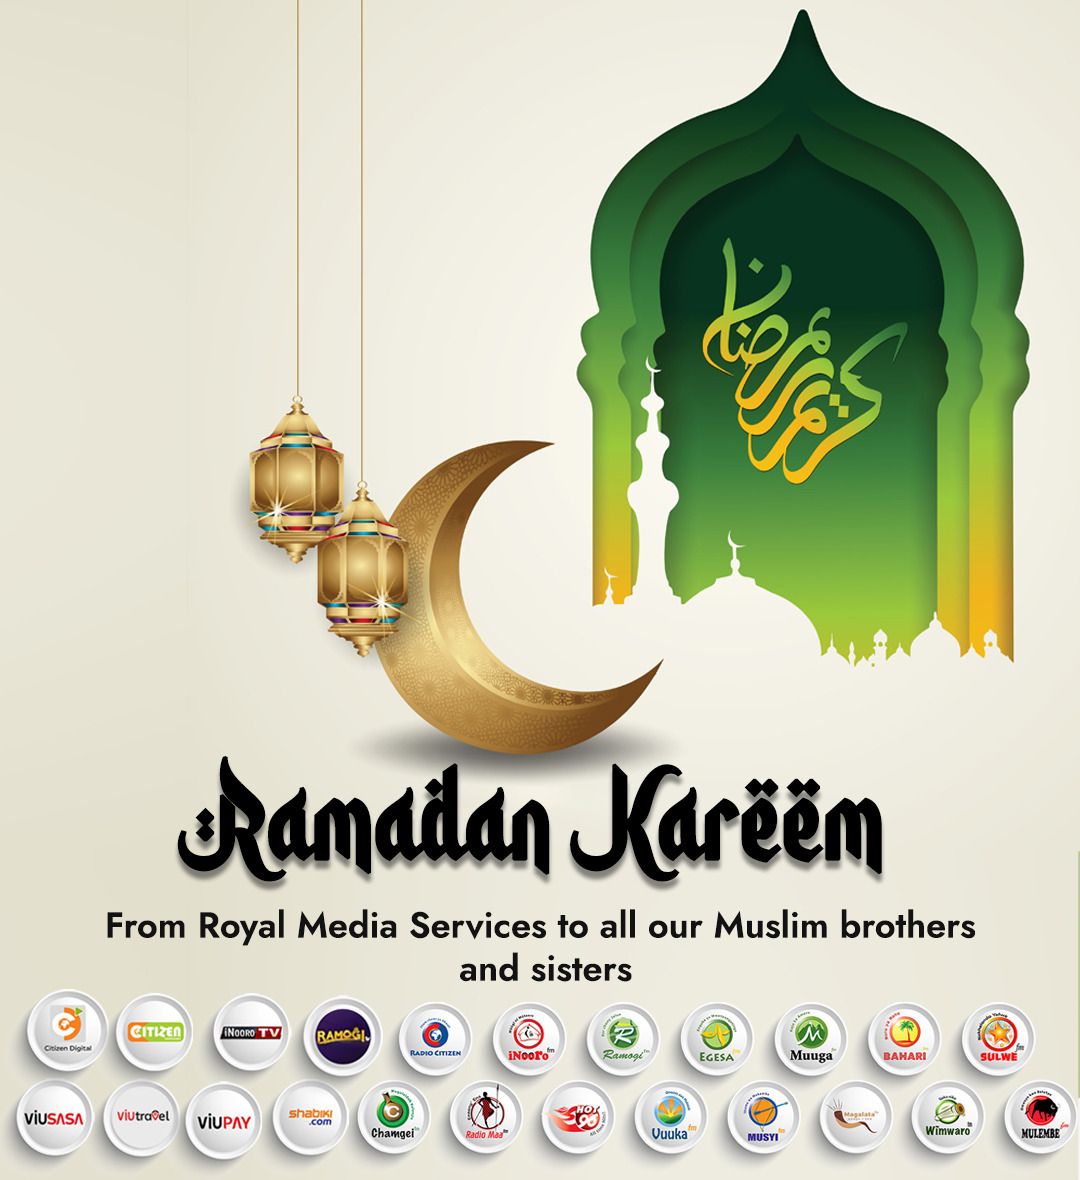 Ramadan Mubarak from all of us at Royal Media Services. May Allah grant you peace and abundance through out this season and beyond.